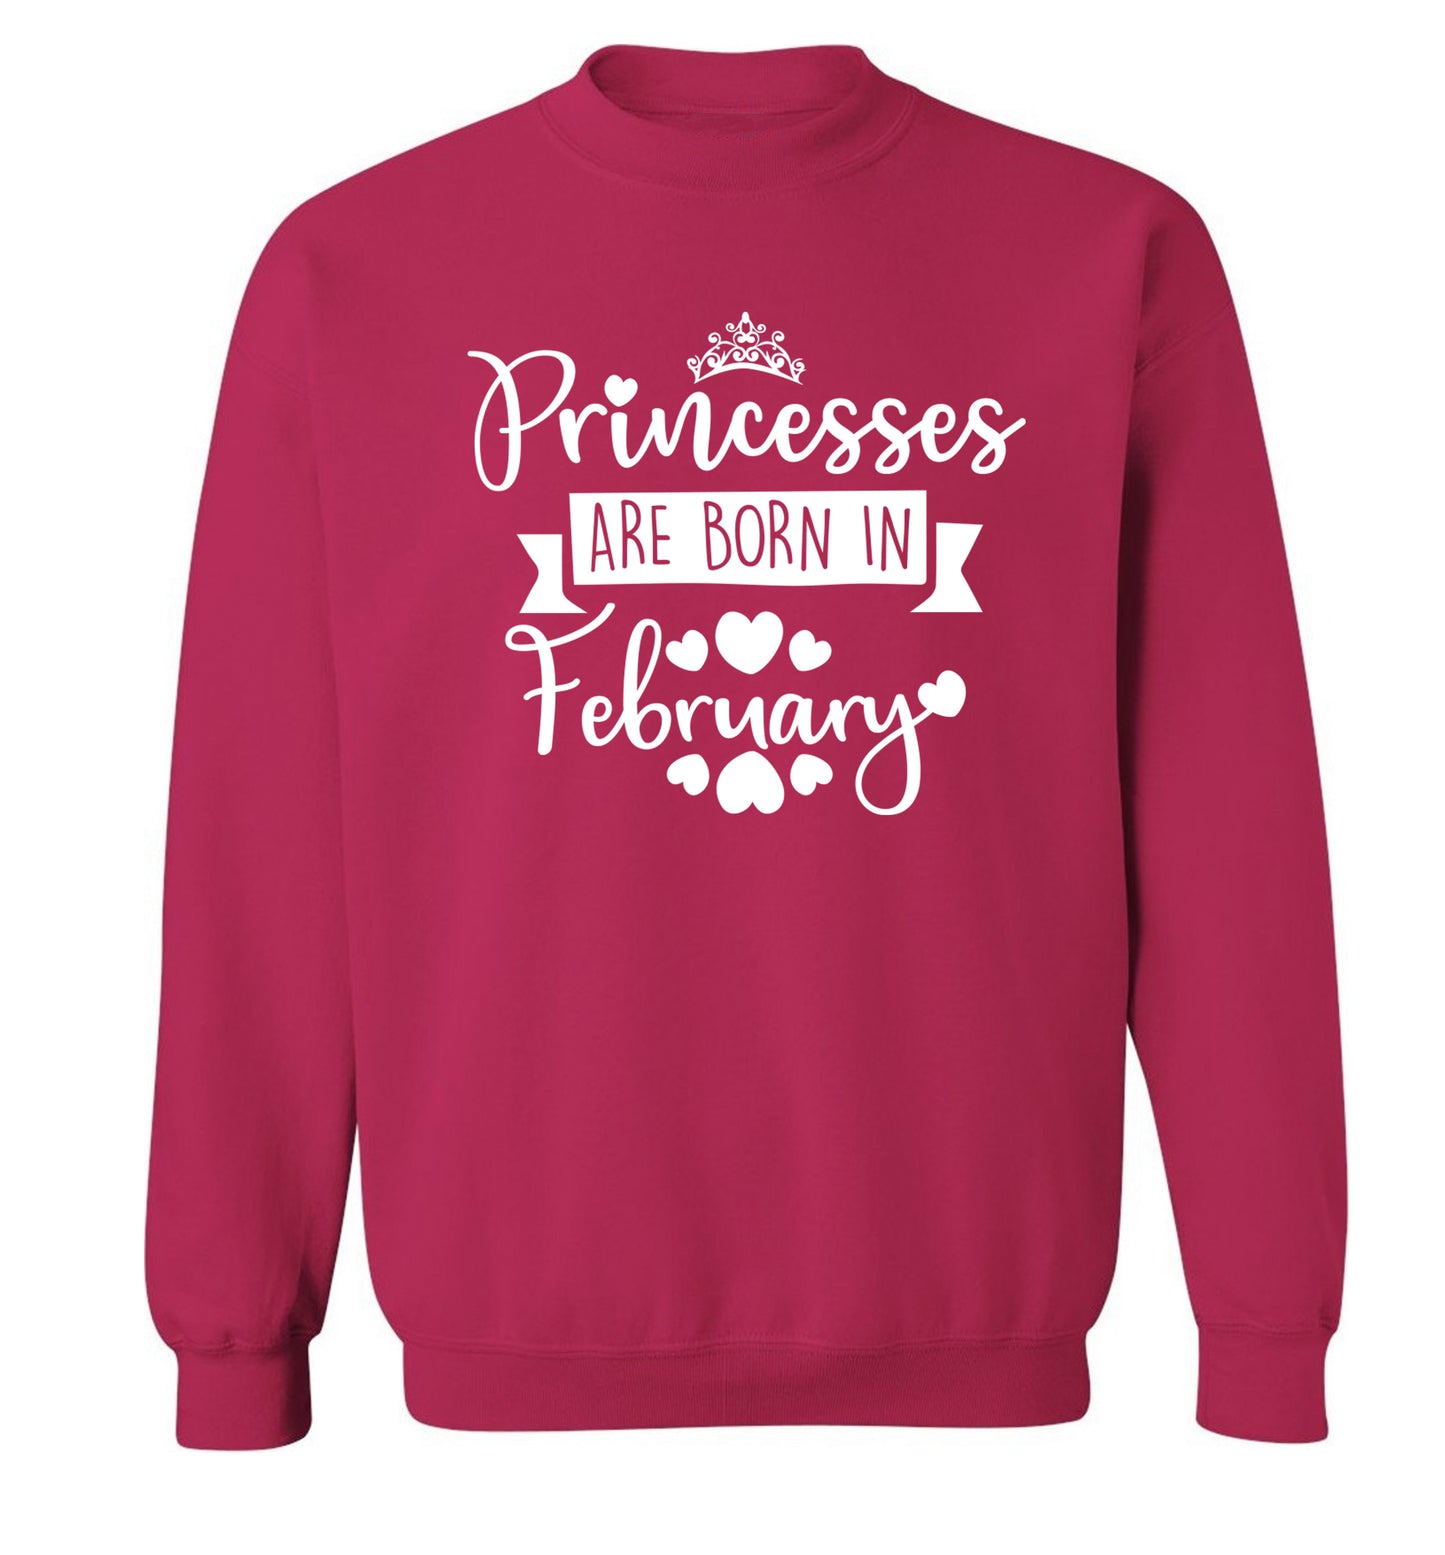 Princesses are born in February Adult's unisex pink Sweater 2XL